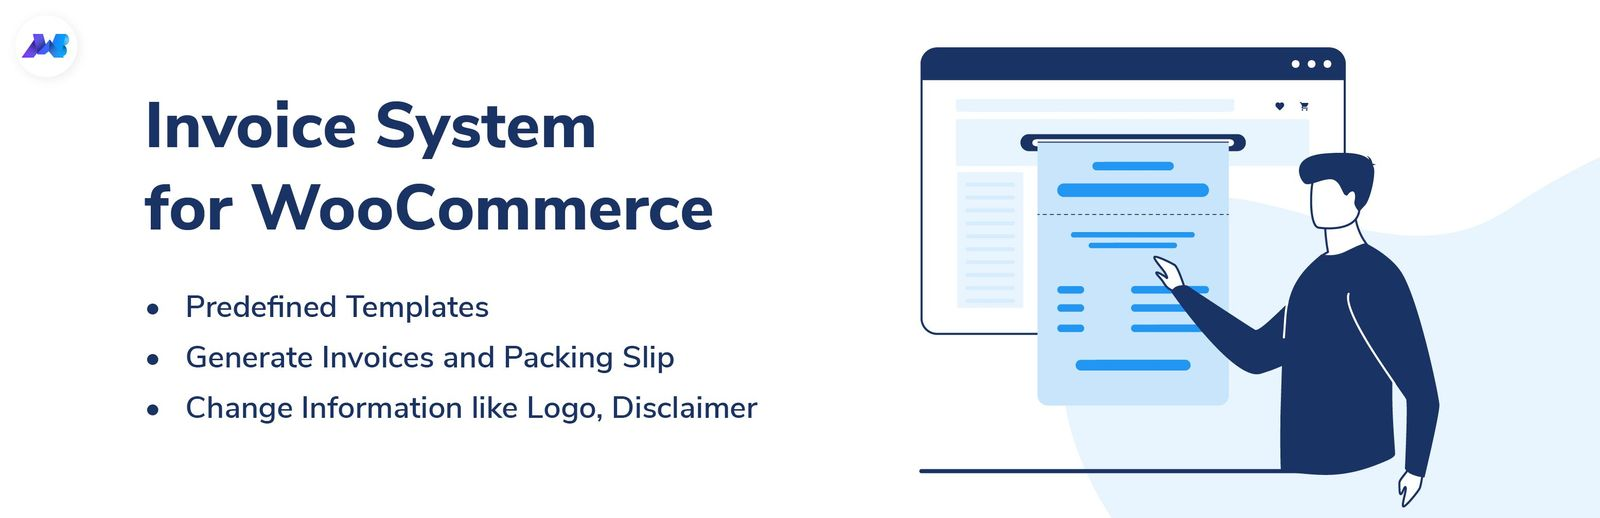 Invoice System For WooCommerce- Automate & Manage PDF Invoices, Packing Slips, Shipping Labels And Delivery Notes Preview Wordpress Plugin - Rating, Reviews, Demo & Download